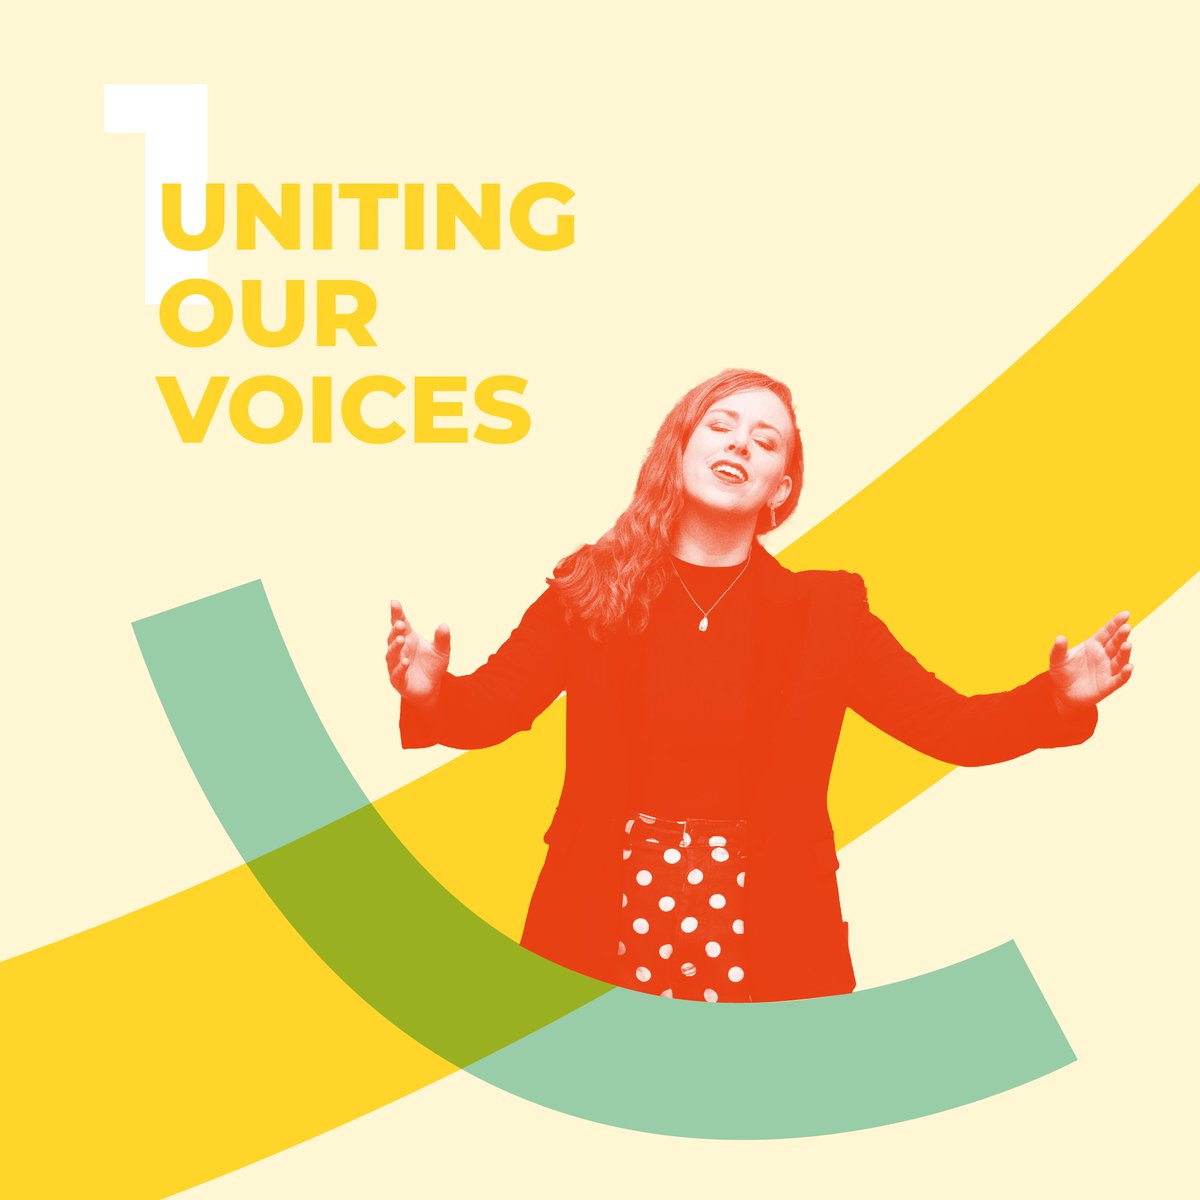 💫Uniting Our Voices 💫 Sing Ireland are dedicated to delivering Objective 1 of our New Strategy ✨ ☘️ Check out our new Strategy 20224-2029 here: eu1.hubs.ly/H08Rh3k0 #unitingourvoices #groupsinging #SingIreland #Objectiveone #strategicplan